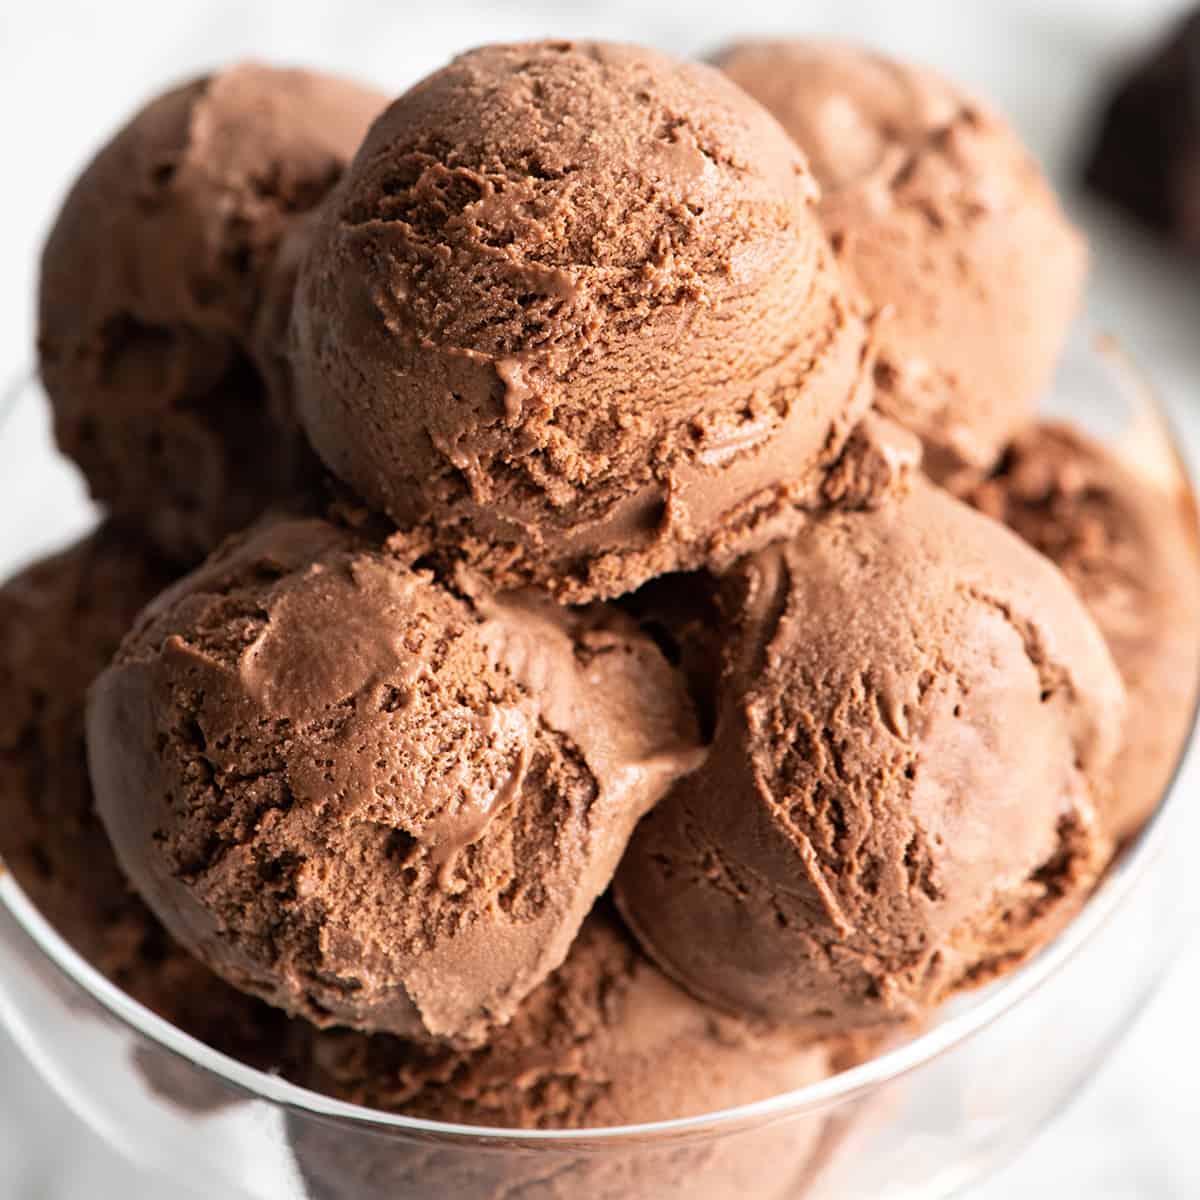 up close view of chocolate ice cream in a glass dish